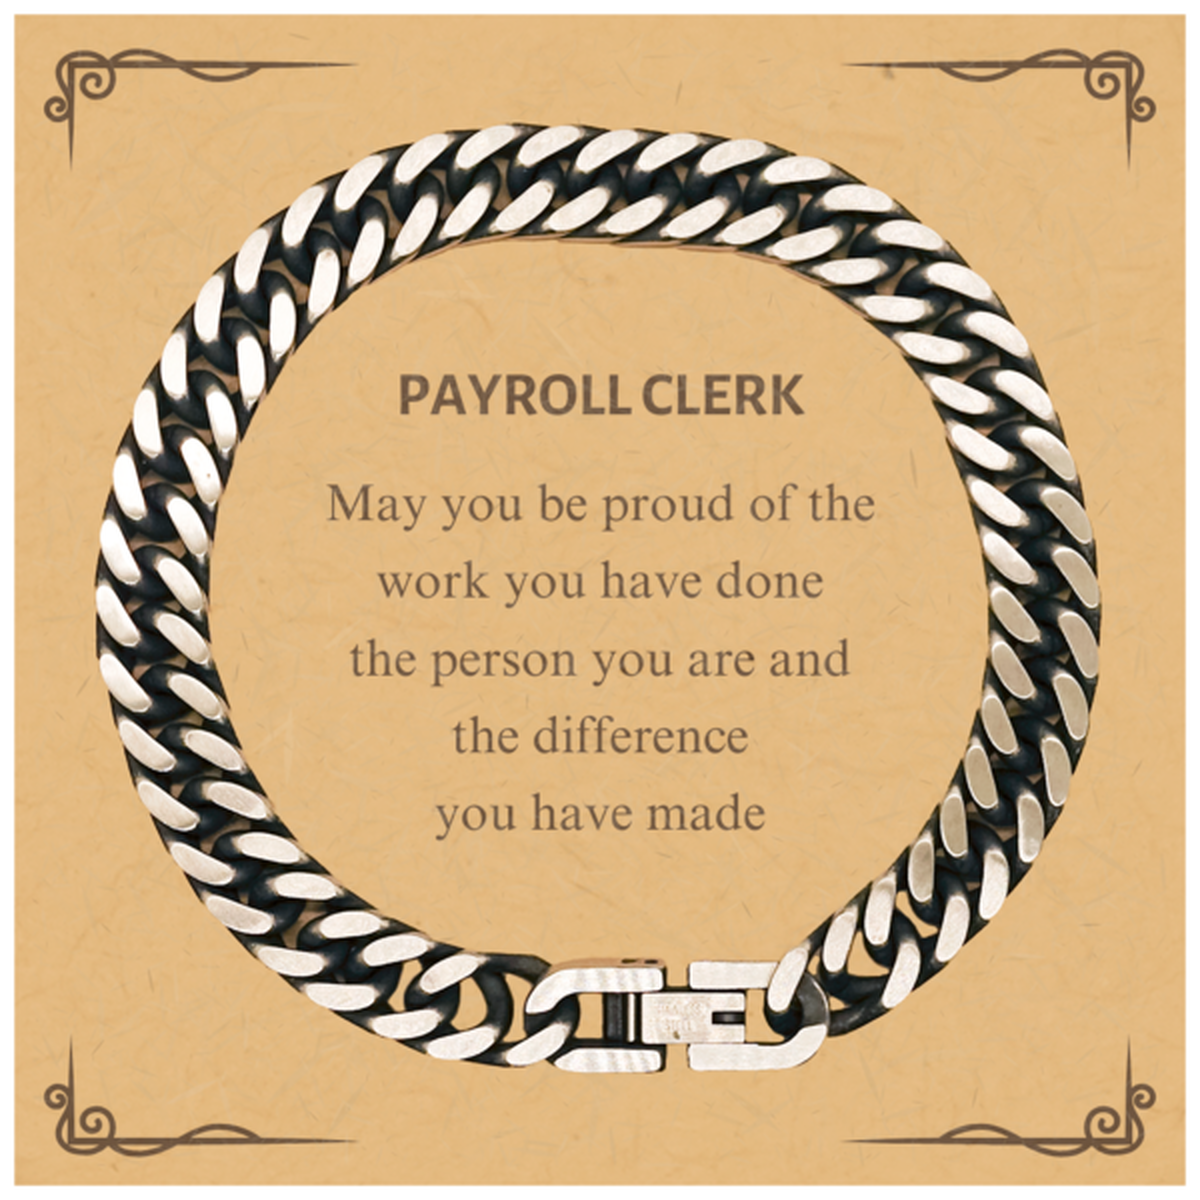 Payroll Clerk May you be proud of the work you have done, Retirement Payroll Clerk Cuban Link Chain Bracelet for Colleague Appreciation Gifts Amazing for Payroll Clerk